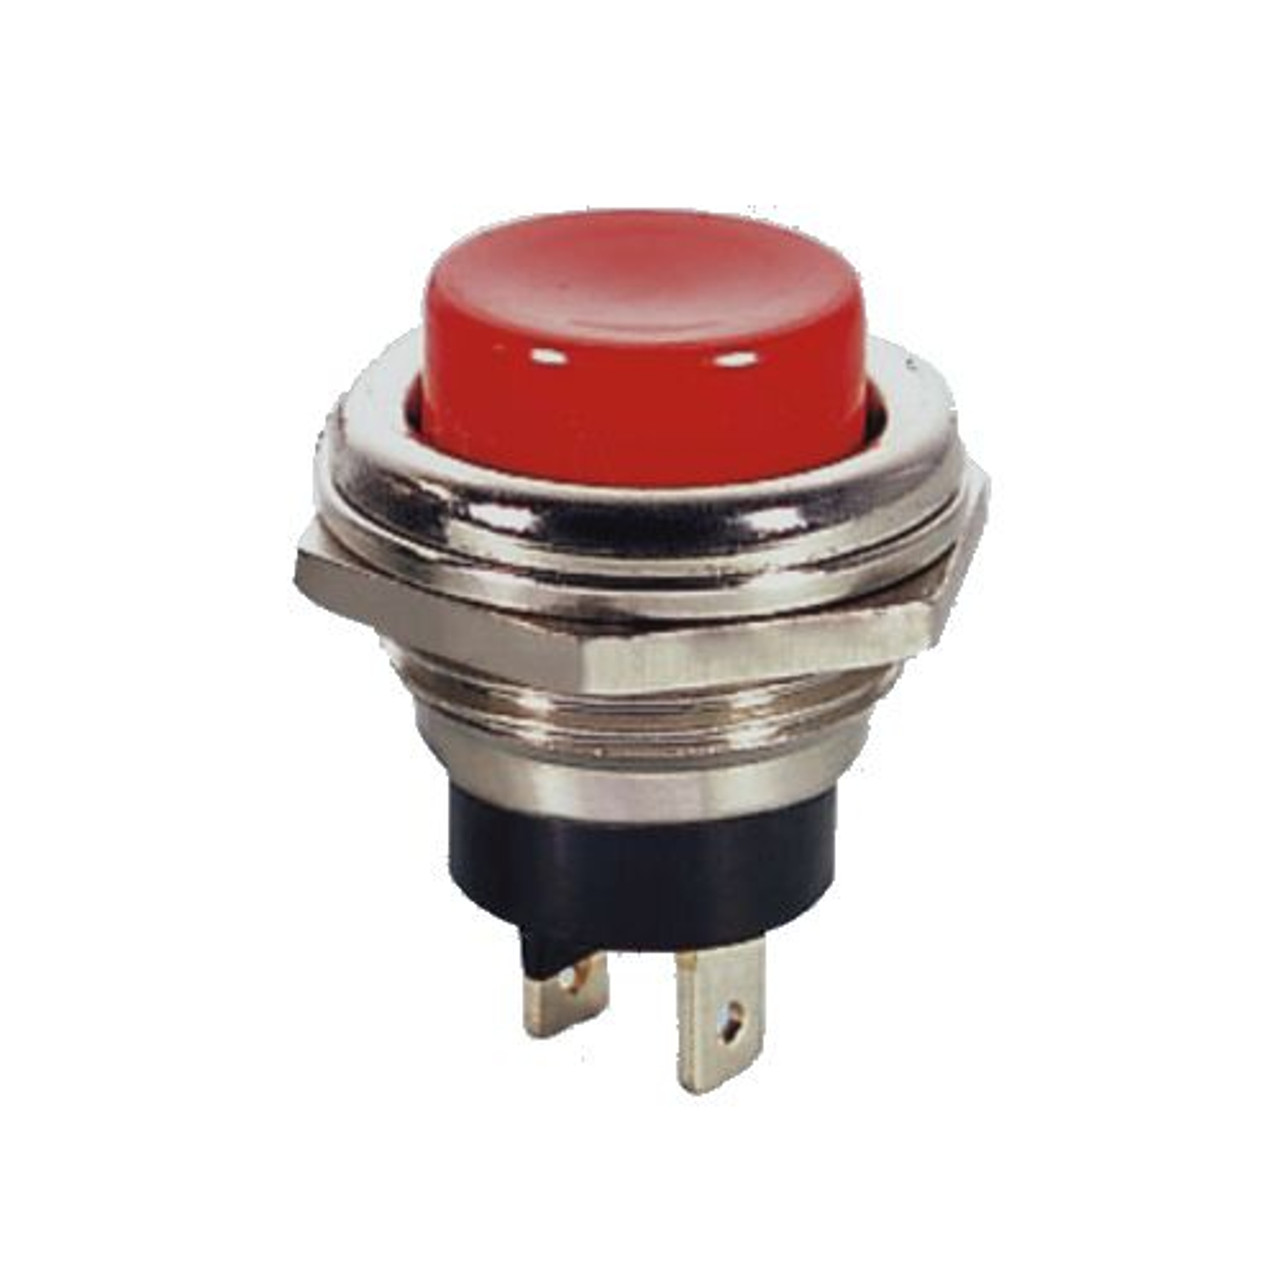 RED - Push Button Switch On/Off SPST 2P 4A 125VAC - P/N CES-66-2421